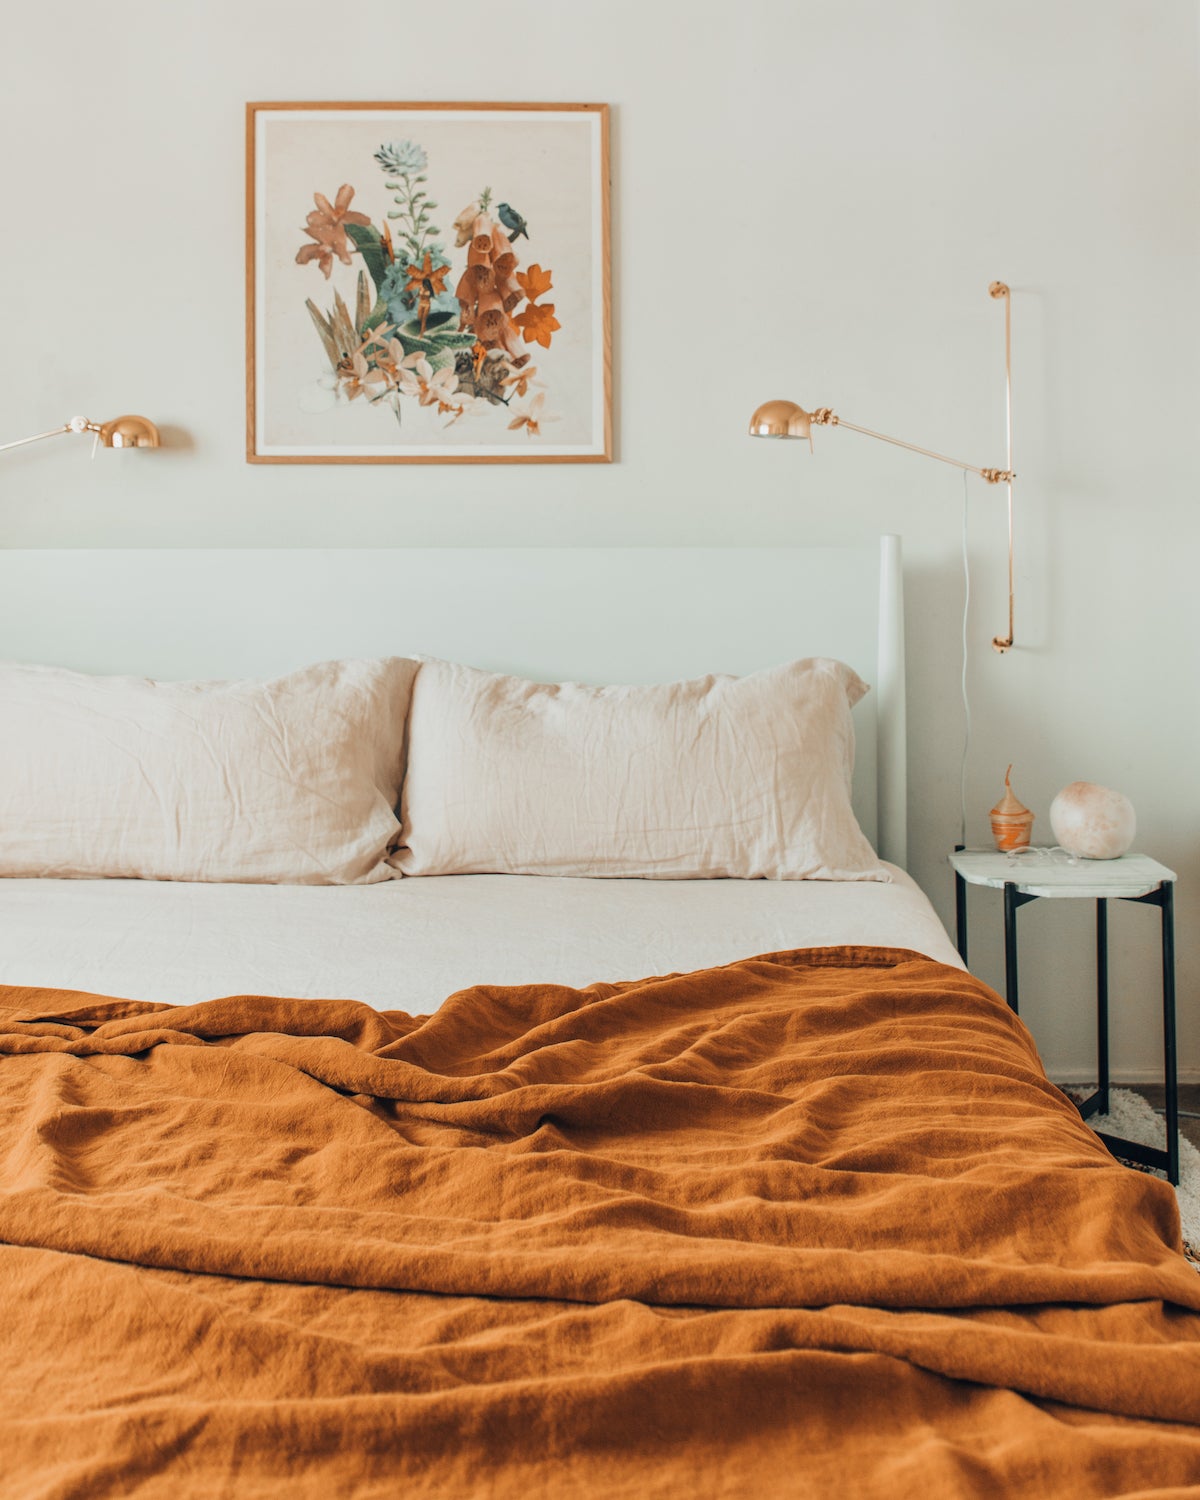 Burnt orange bedspread in an otherwise white room